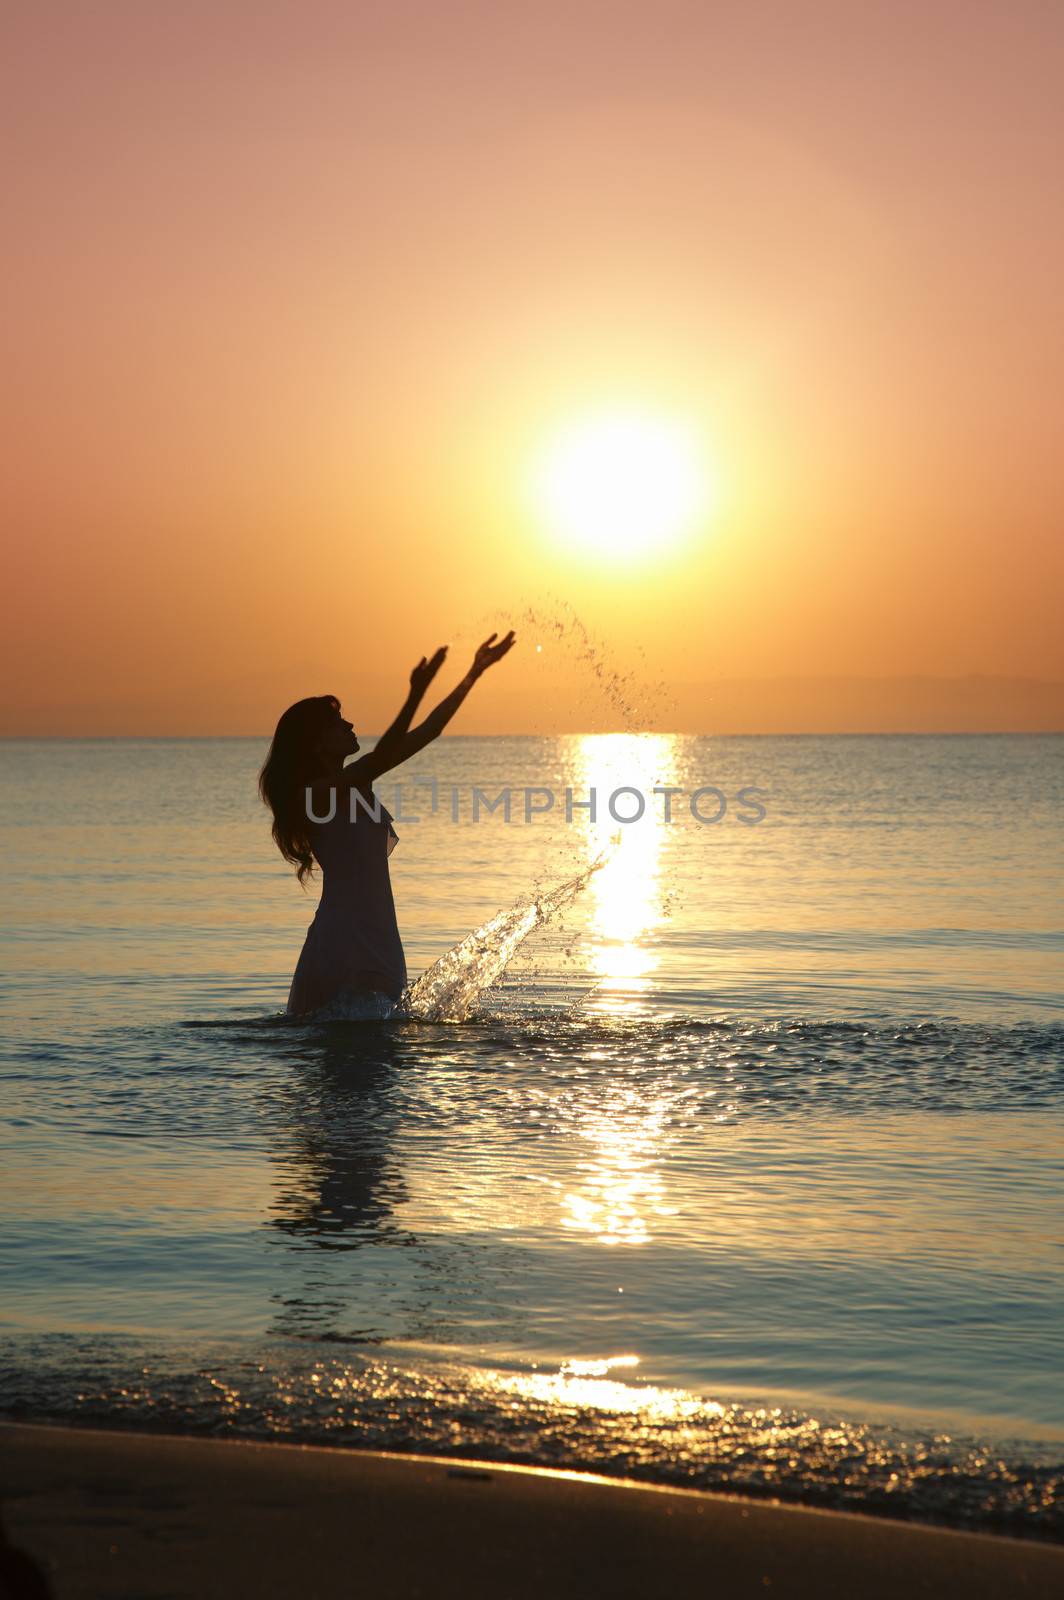 Silhouette of the woman playing with water during sunset. Natural darkness and colors